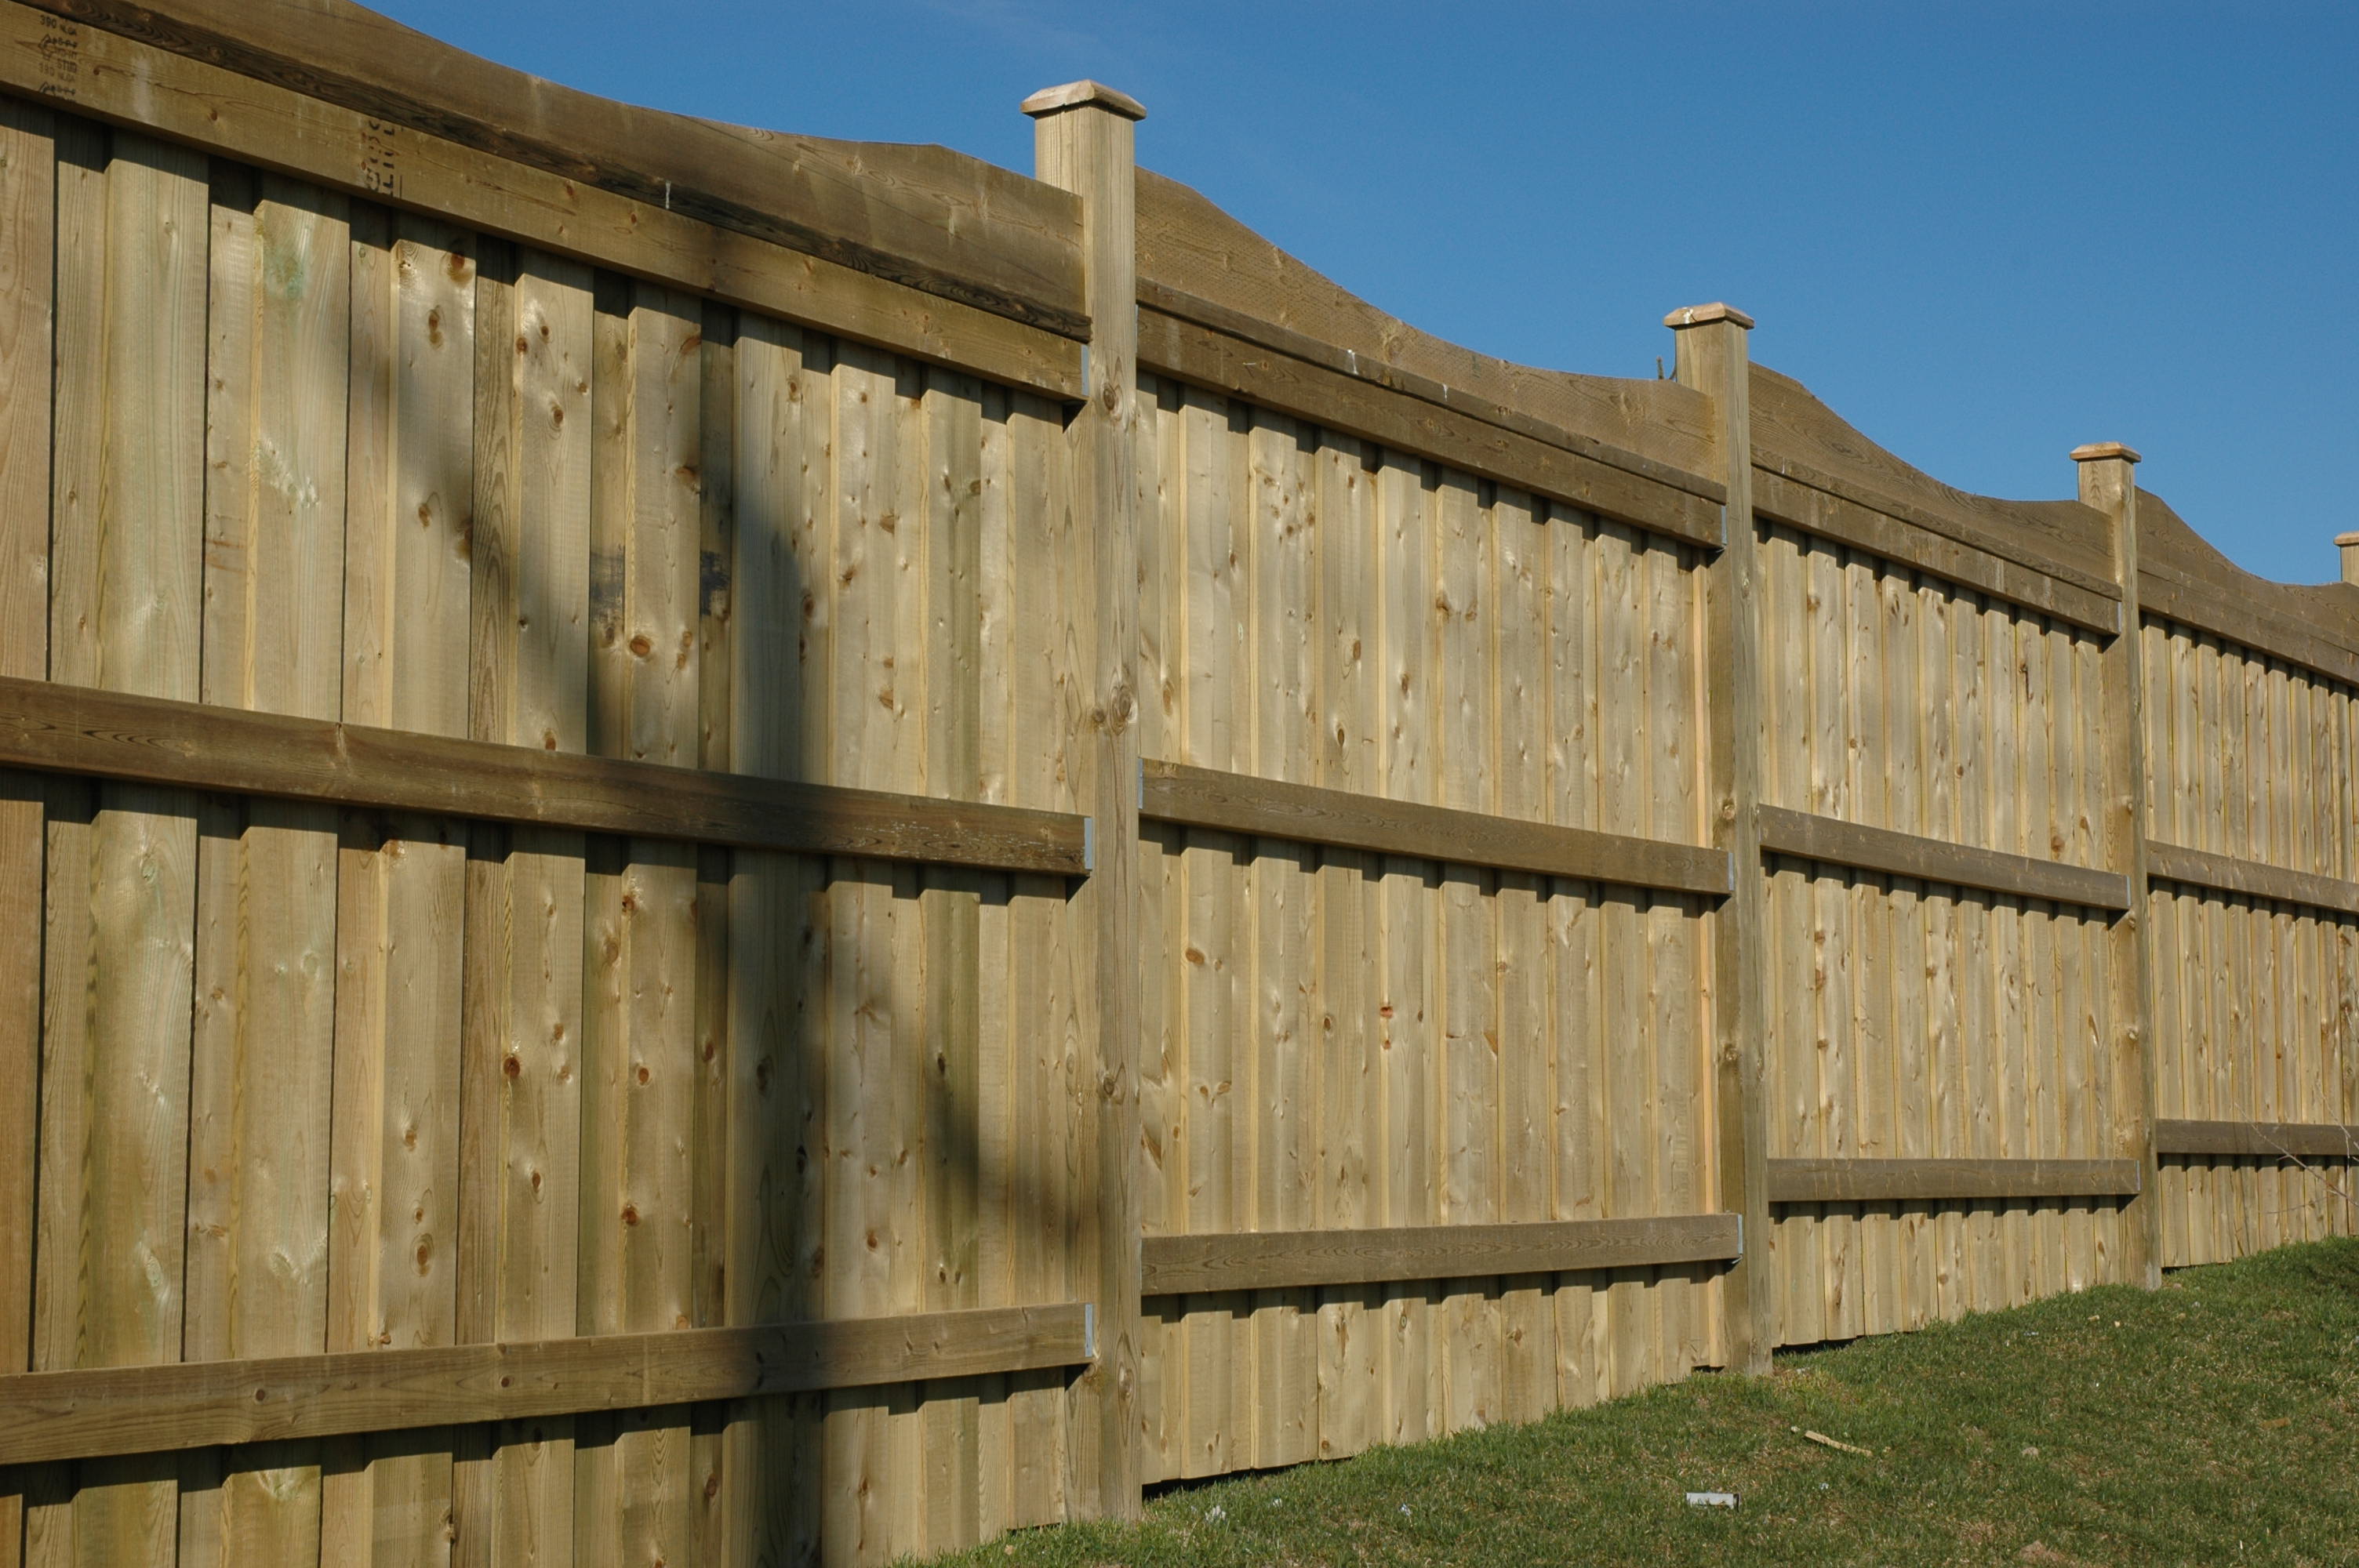 Privacy Fence Designs